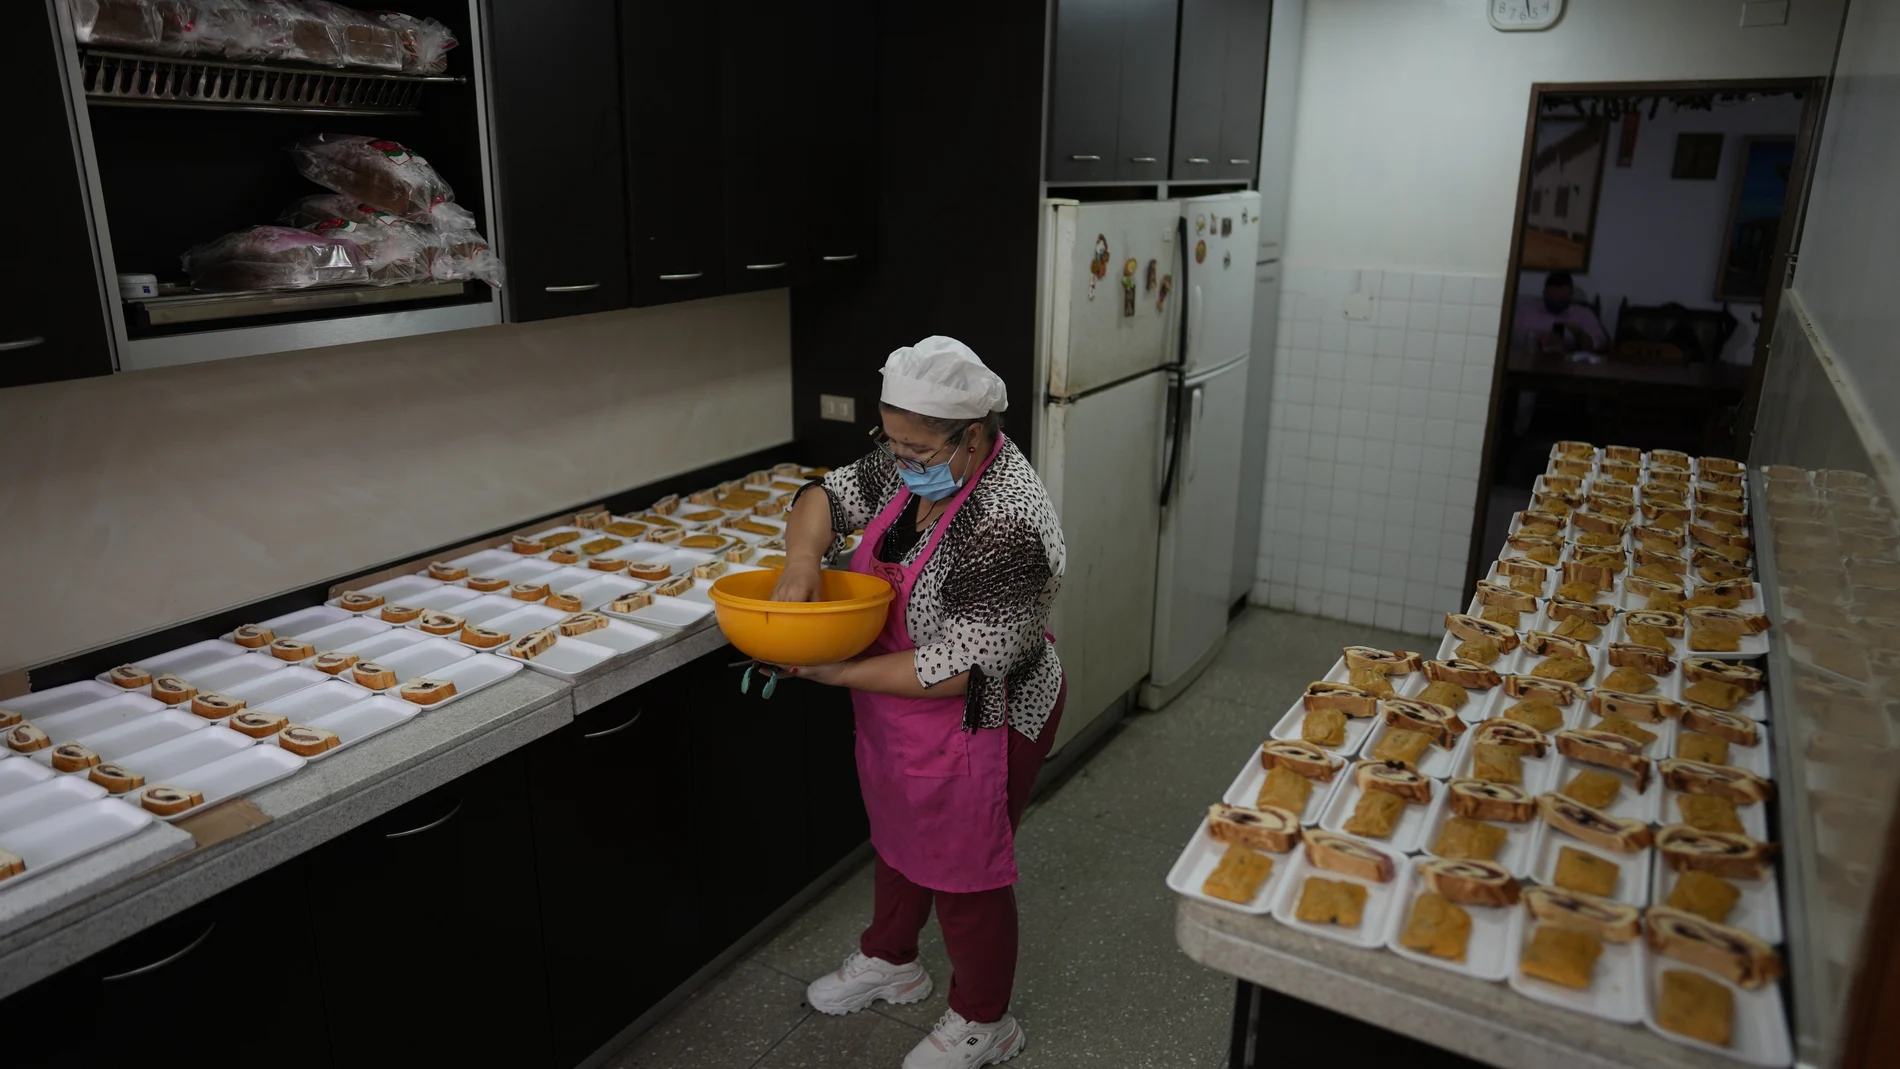 A woman prepares Christmas meals to be served at the San Miguel Archangel church as a part of Christmas celebrations in Caracas, Venezuela, Tuesday, Dec. 21, 2021.The church serves a traditional Venezuela Christmas meal for about two hundred children including nursing mothers. (AP Photo/Ariana Cubillos)